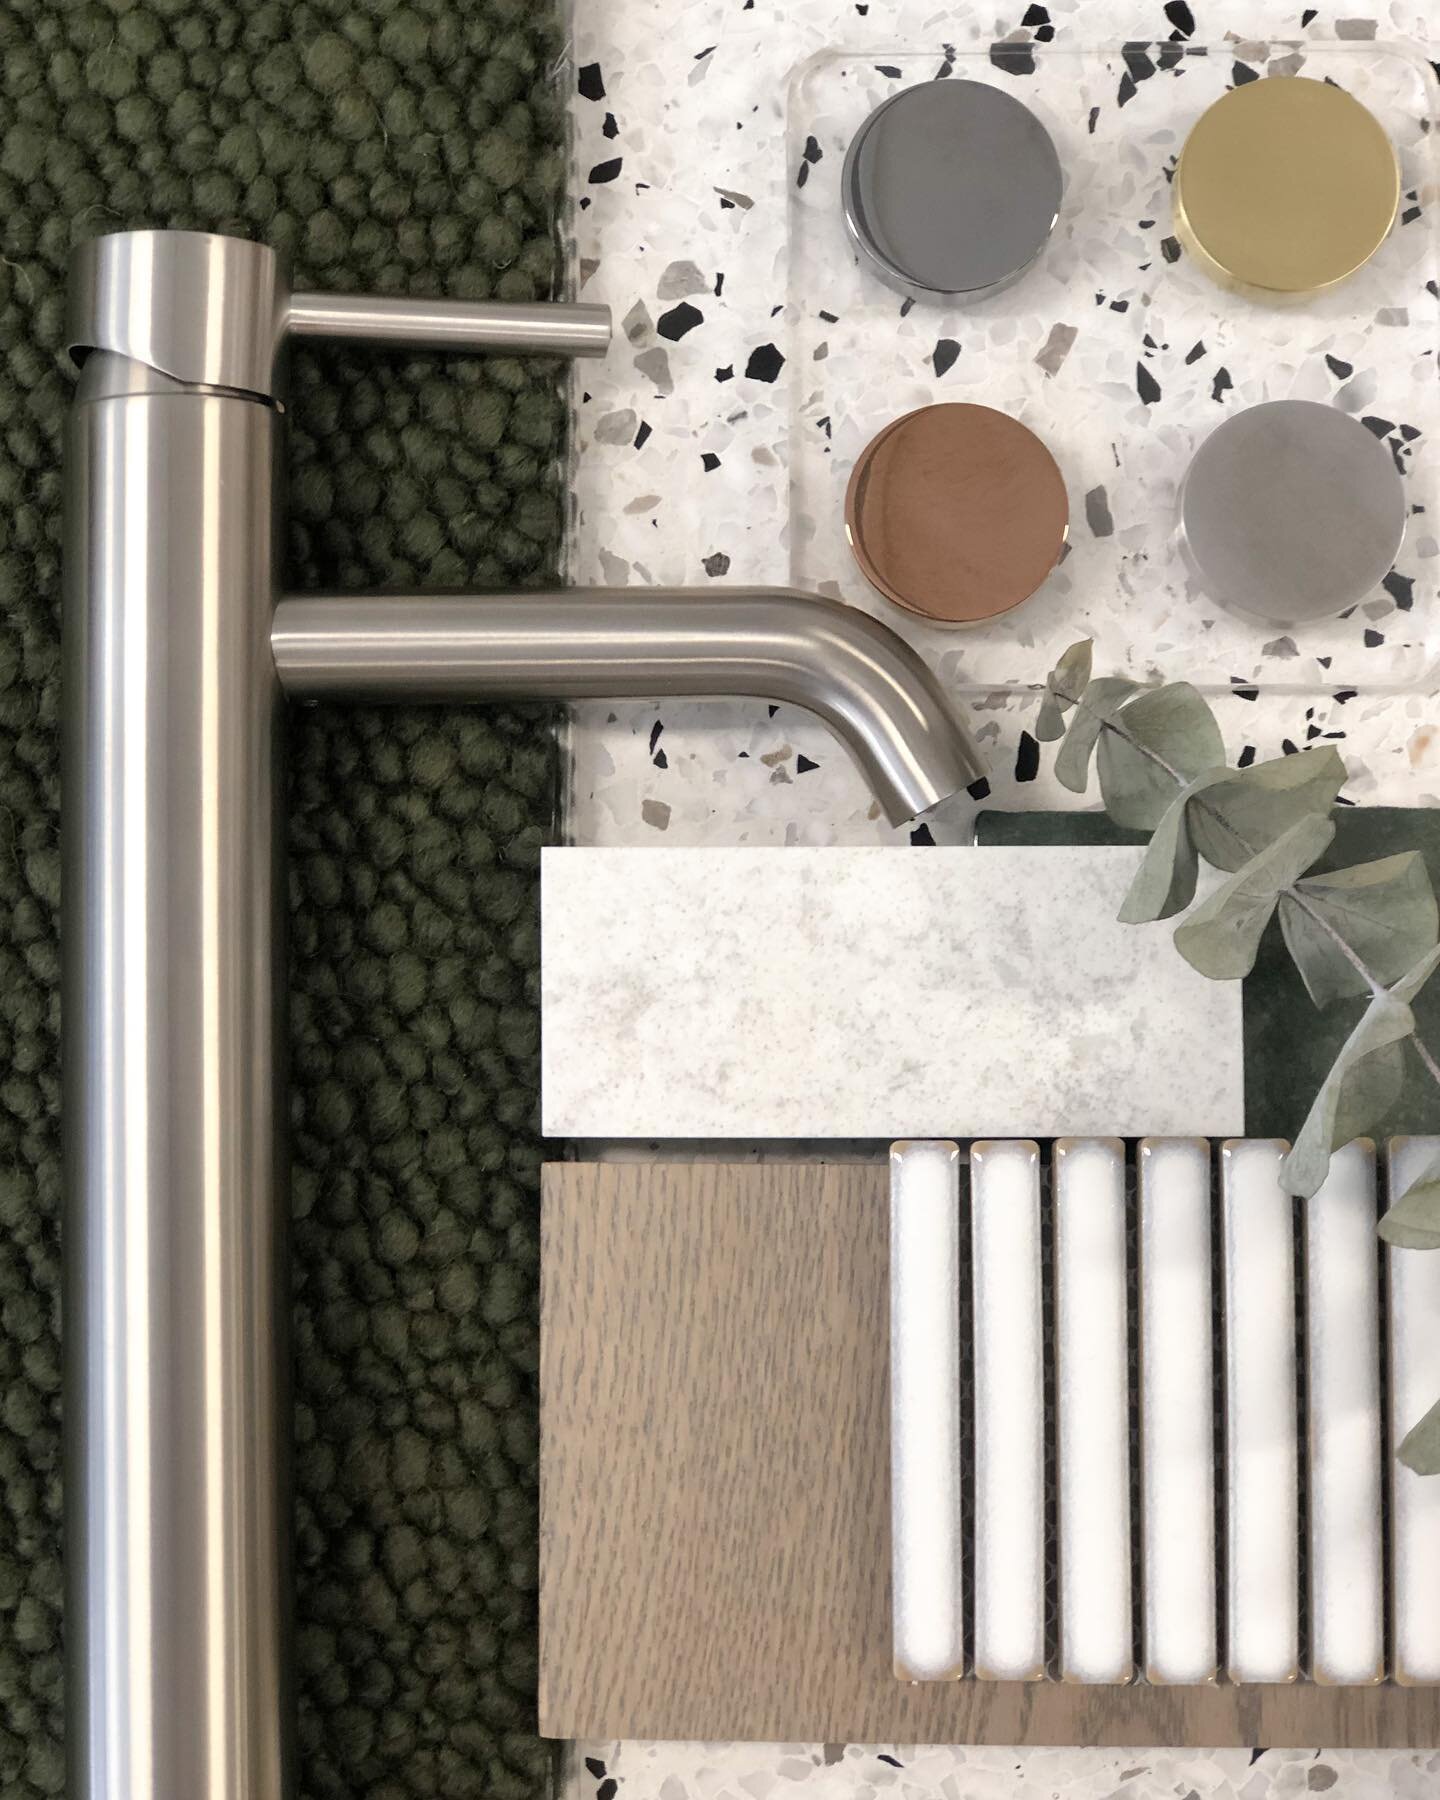 Today&rsquo;s flat lay inspired by our new tapware range - Urban. How amazing does the brushes stainless look with a pop of green! 

The full range is available now in our Christchurch showroom 🎉